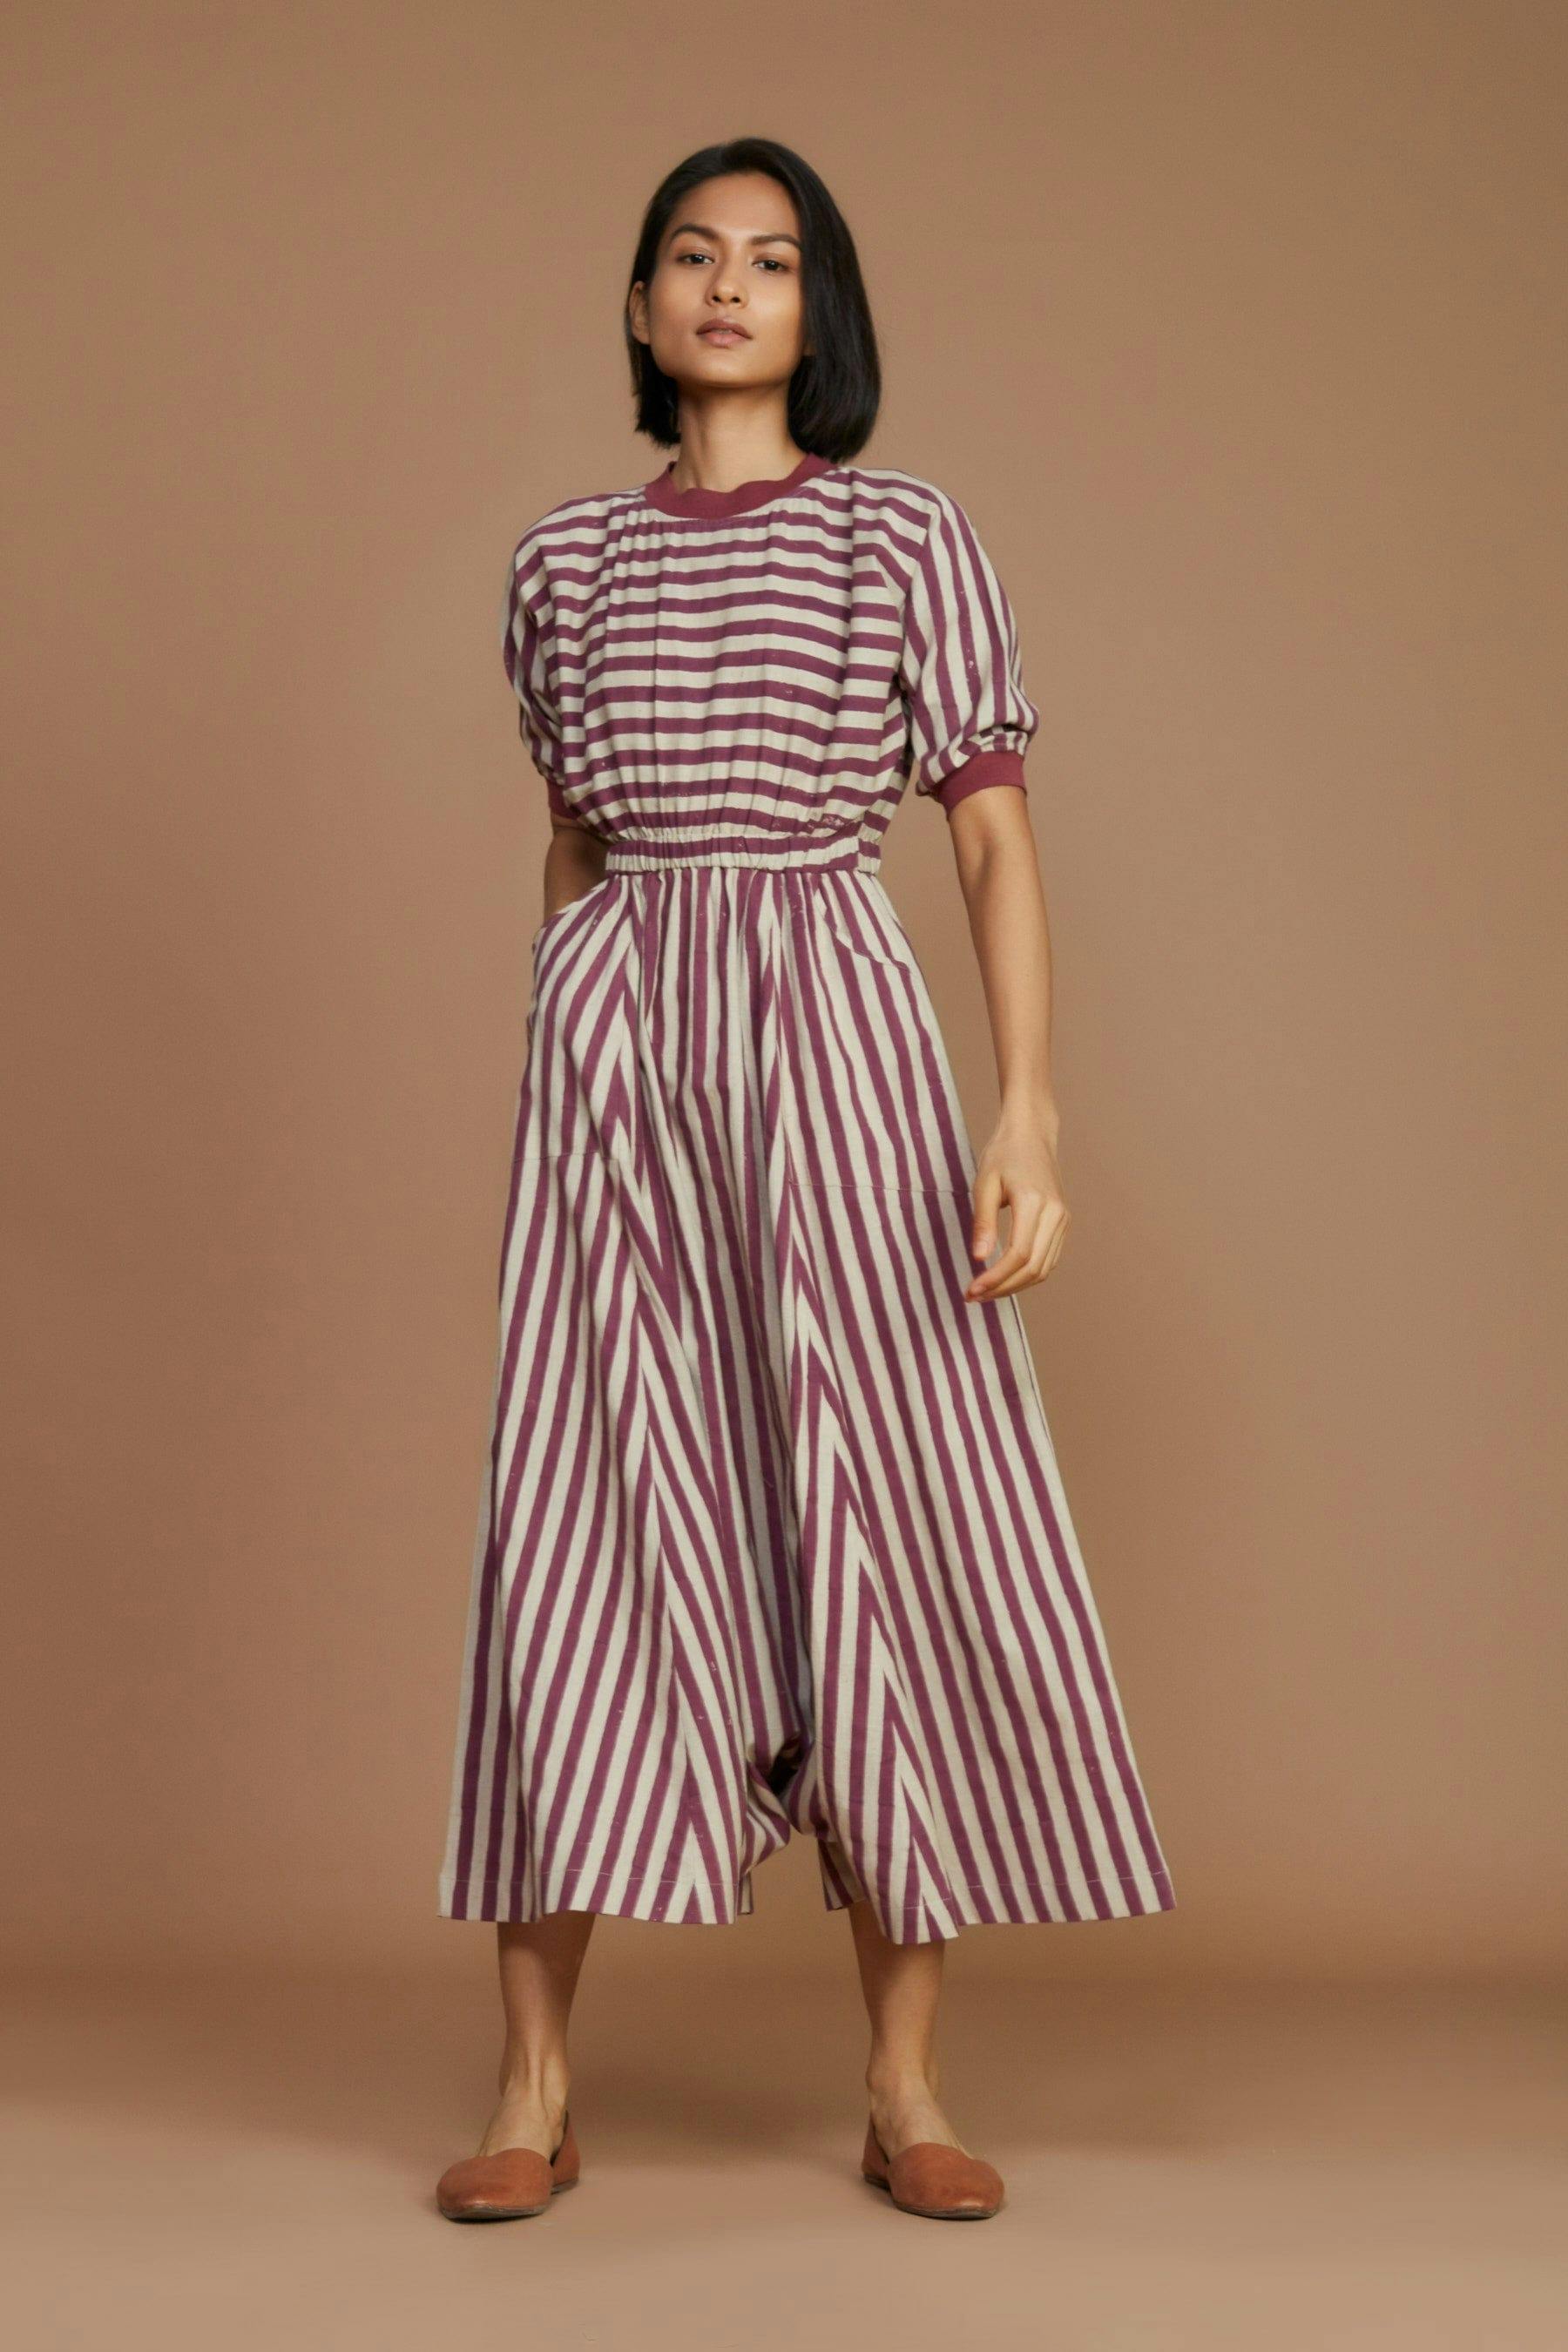 Ivory and Mauve Striped Mati Sphara Jumpsuit, a product by Style Mati